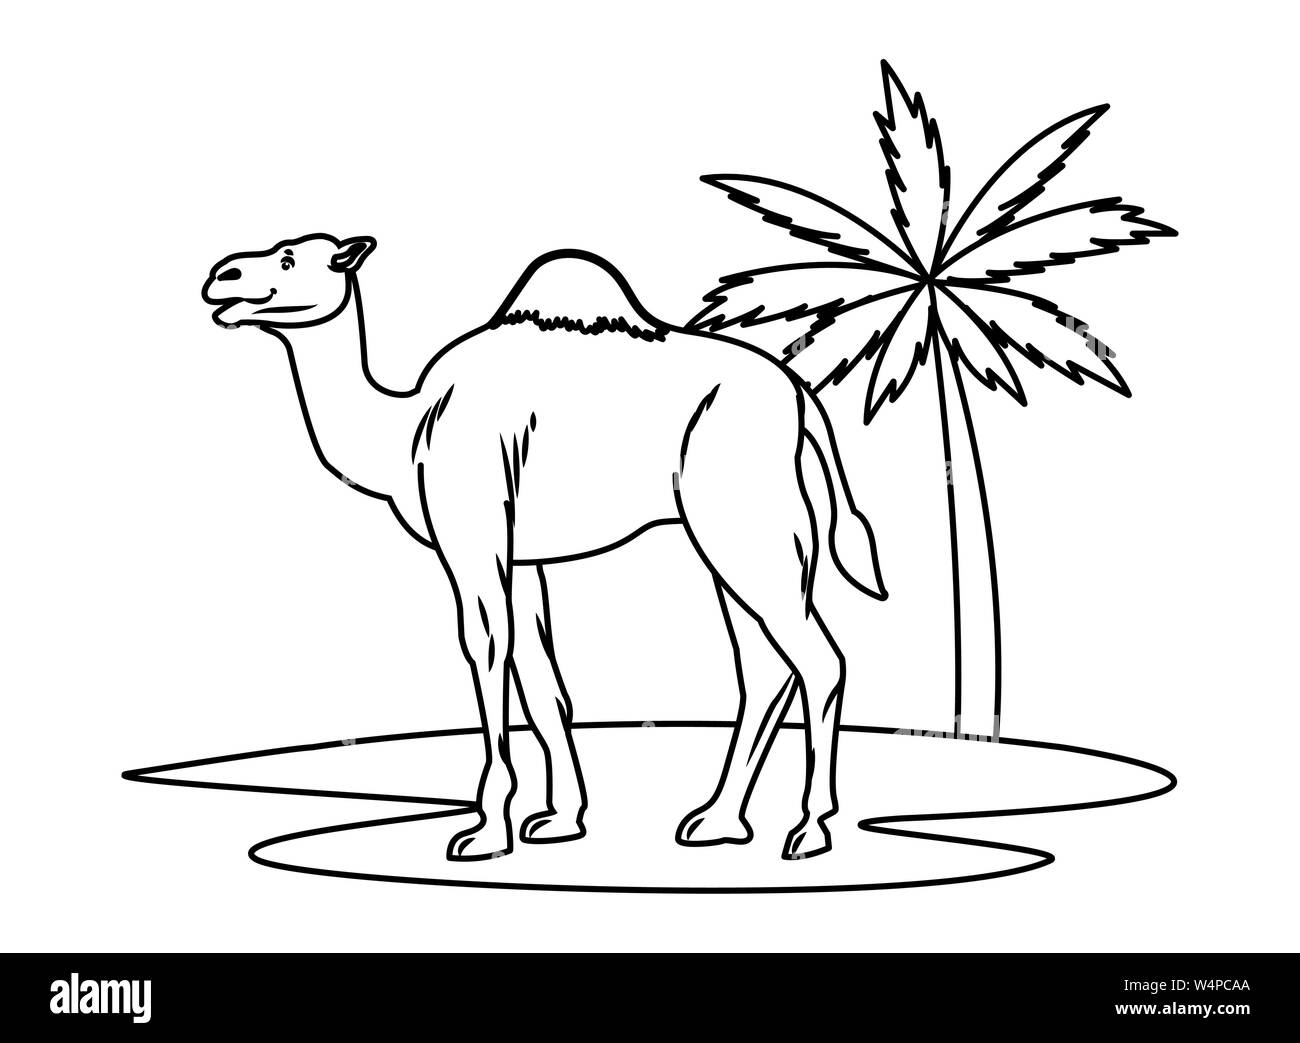 Drawn Camels Easy - Easy Cartoon Step By Step Camel Transparent PNG -  640x480 - Free Download on NicePNG